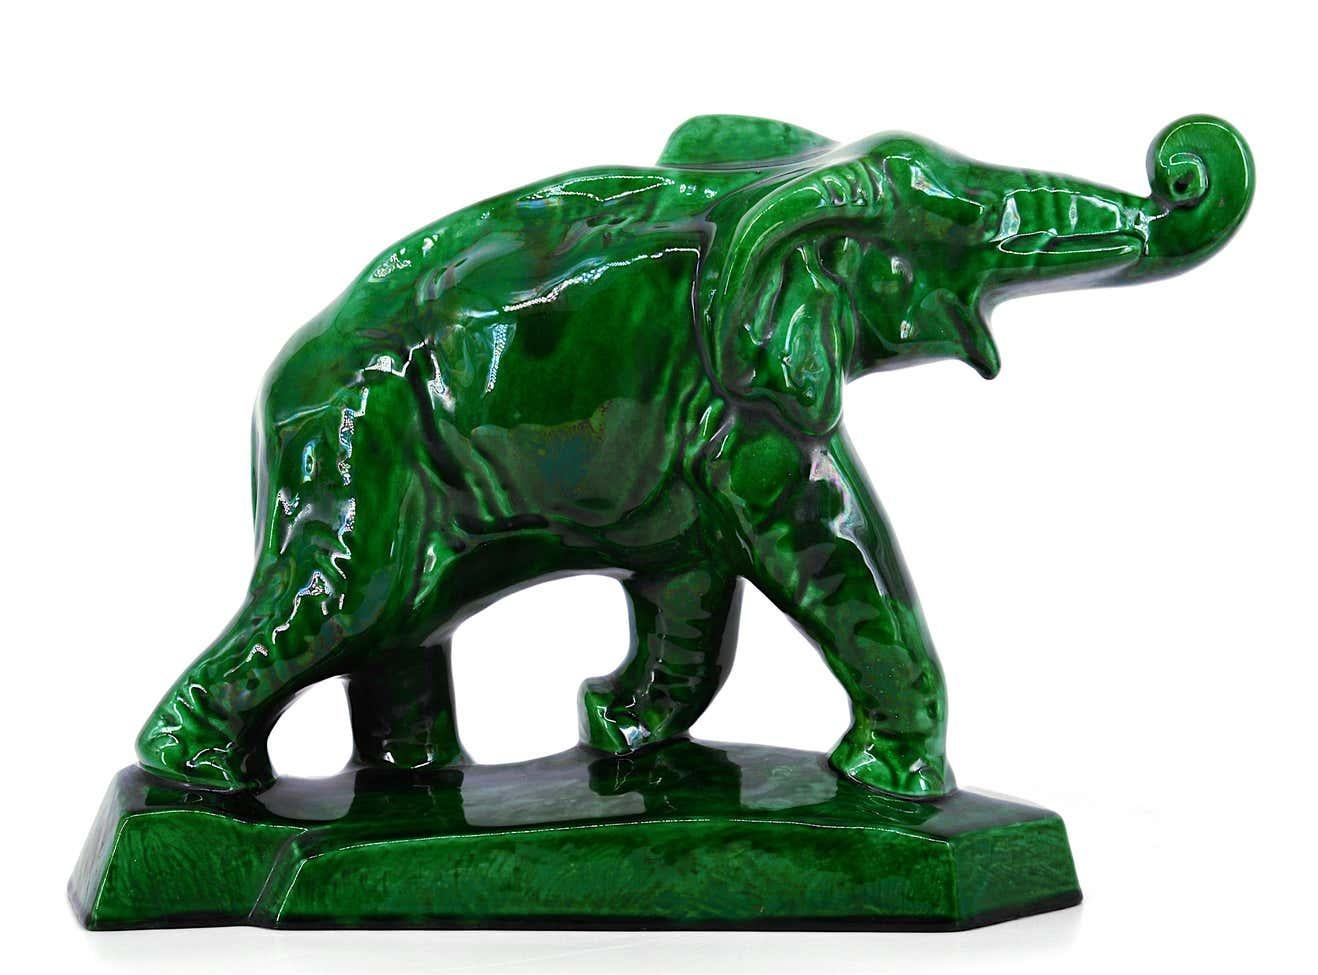 French Art Deco glazed ceramic elephant statue by Charles Lemanceau at Saint-Clement, France, 1930s. Measures: width 14.8